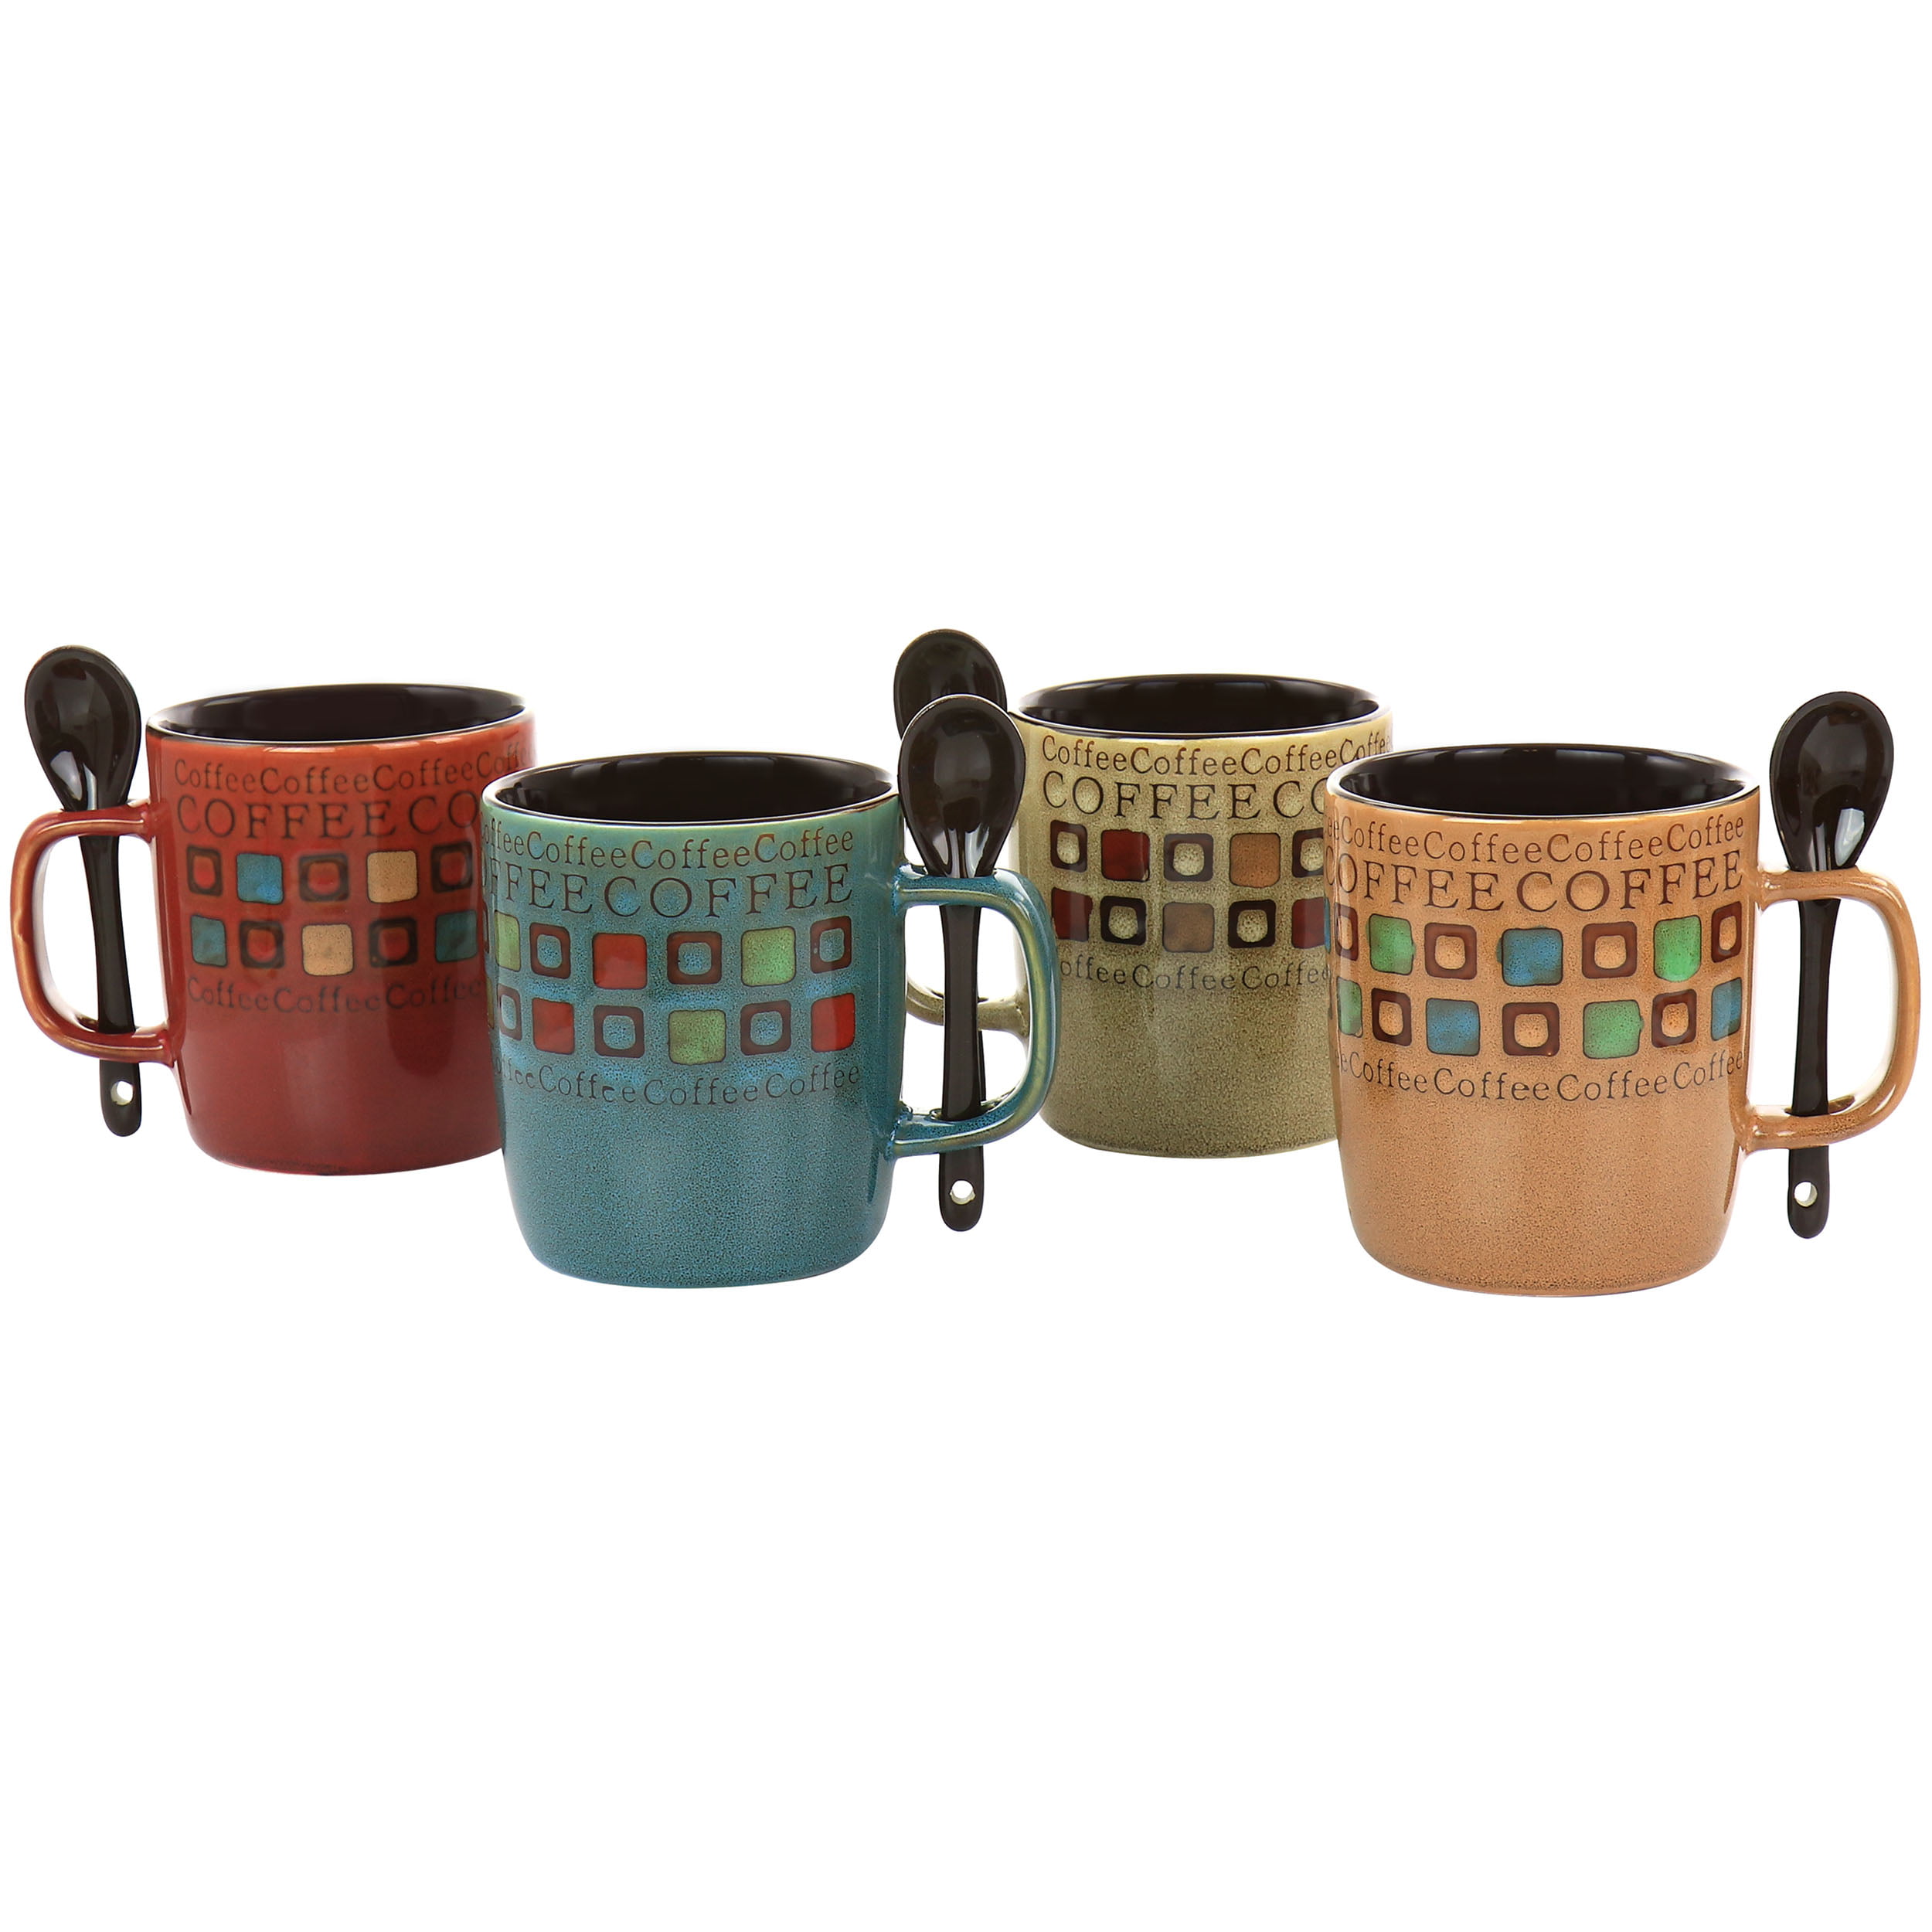 Details about   Bruntmor Ceramic Coffee Mugs Set of 4 Love Inspirational Mugs 11 Ounce Turquoise 